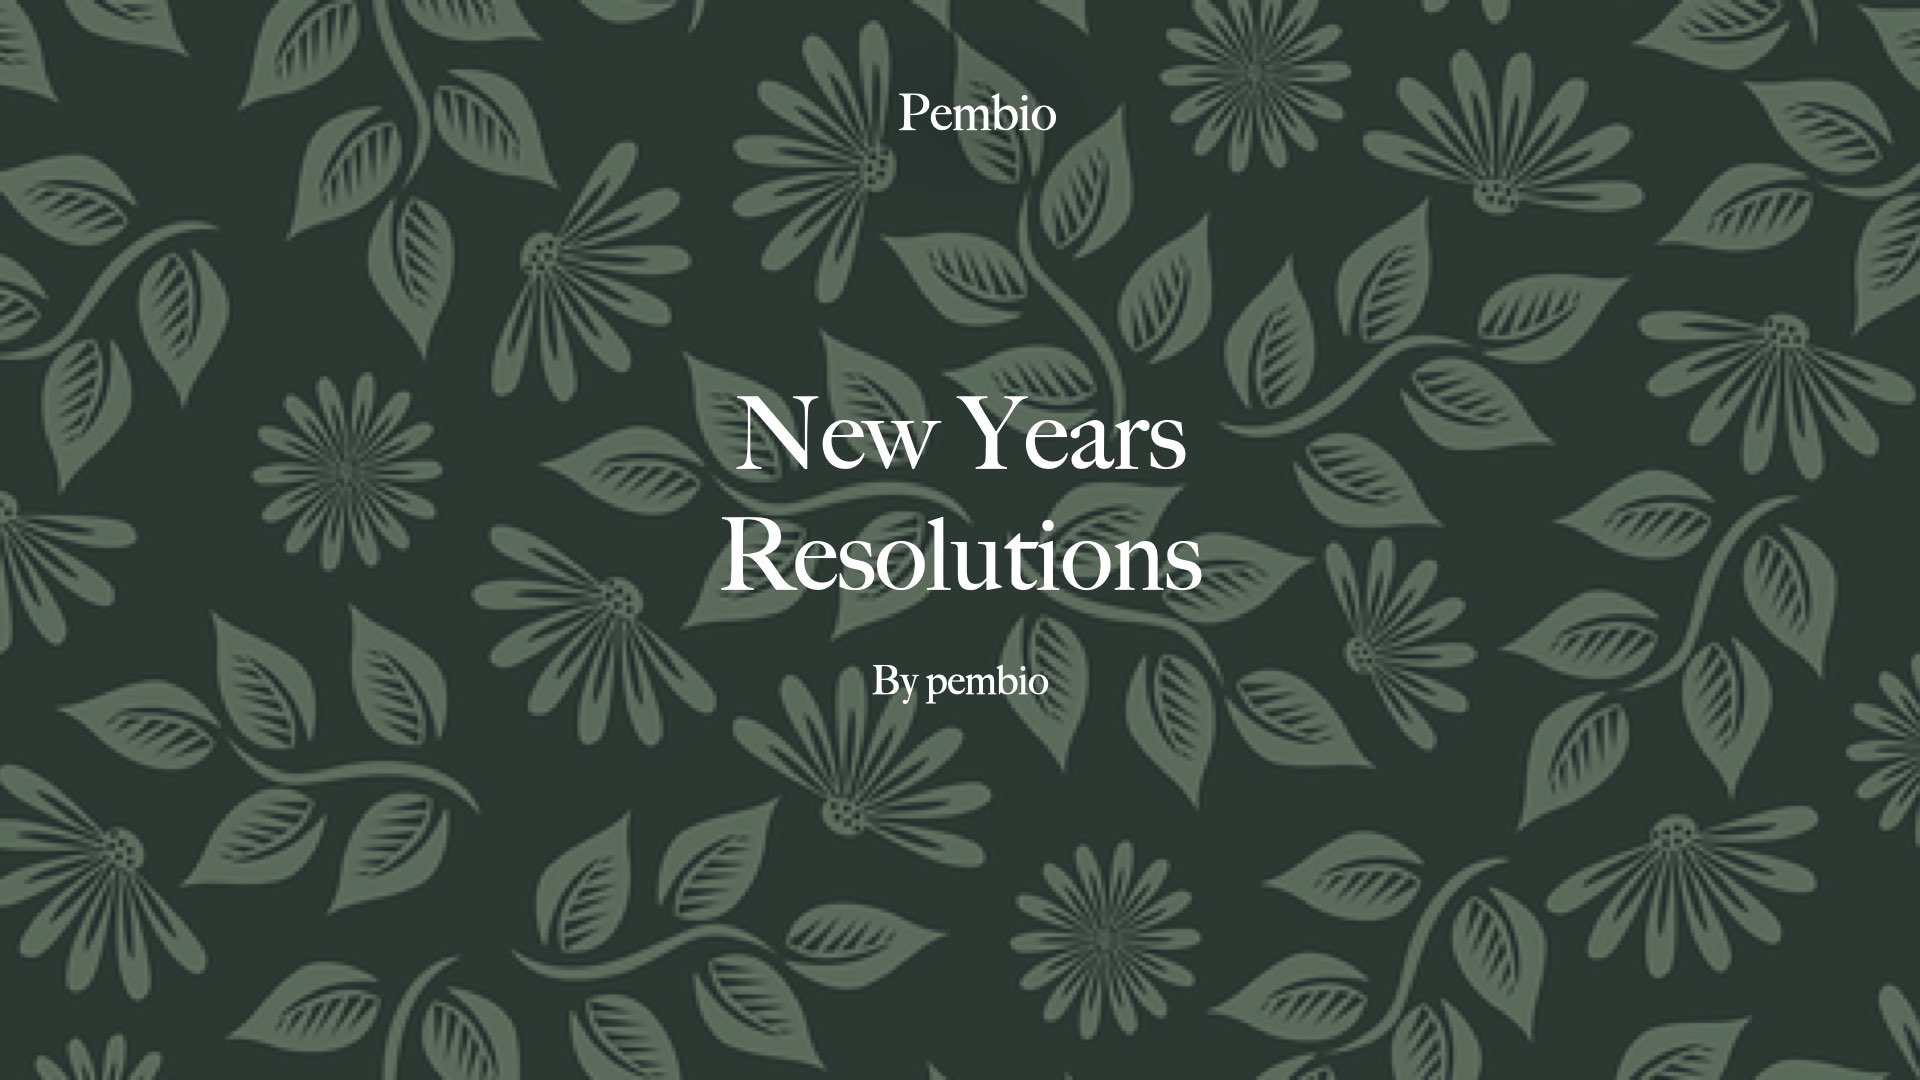 New years resolutions physical health wellness